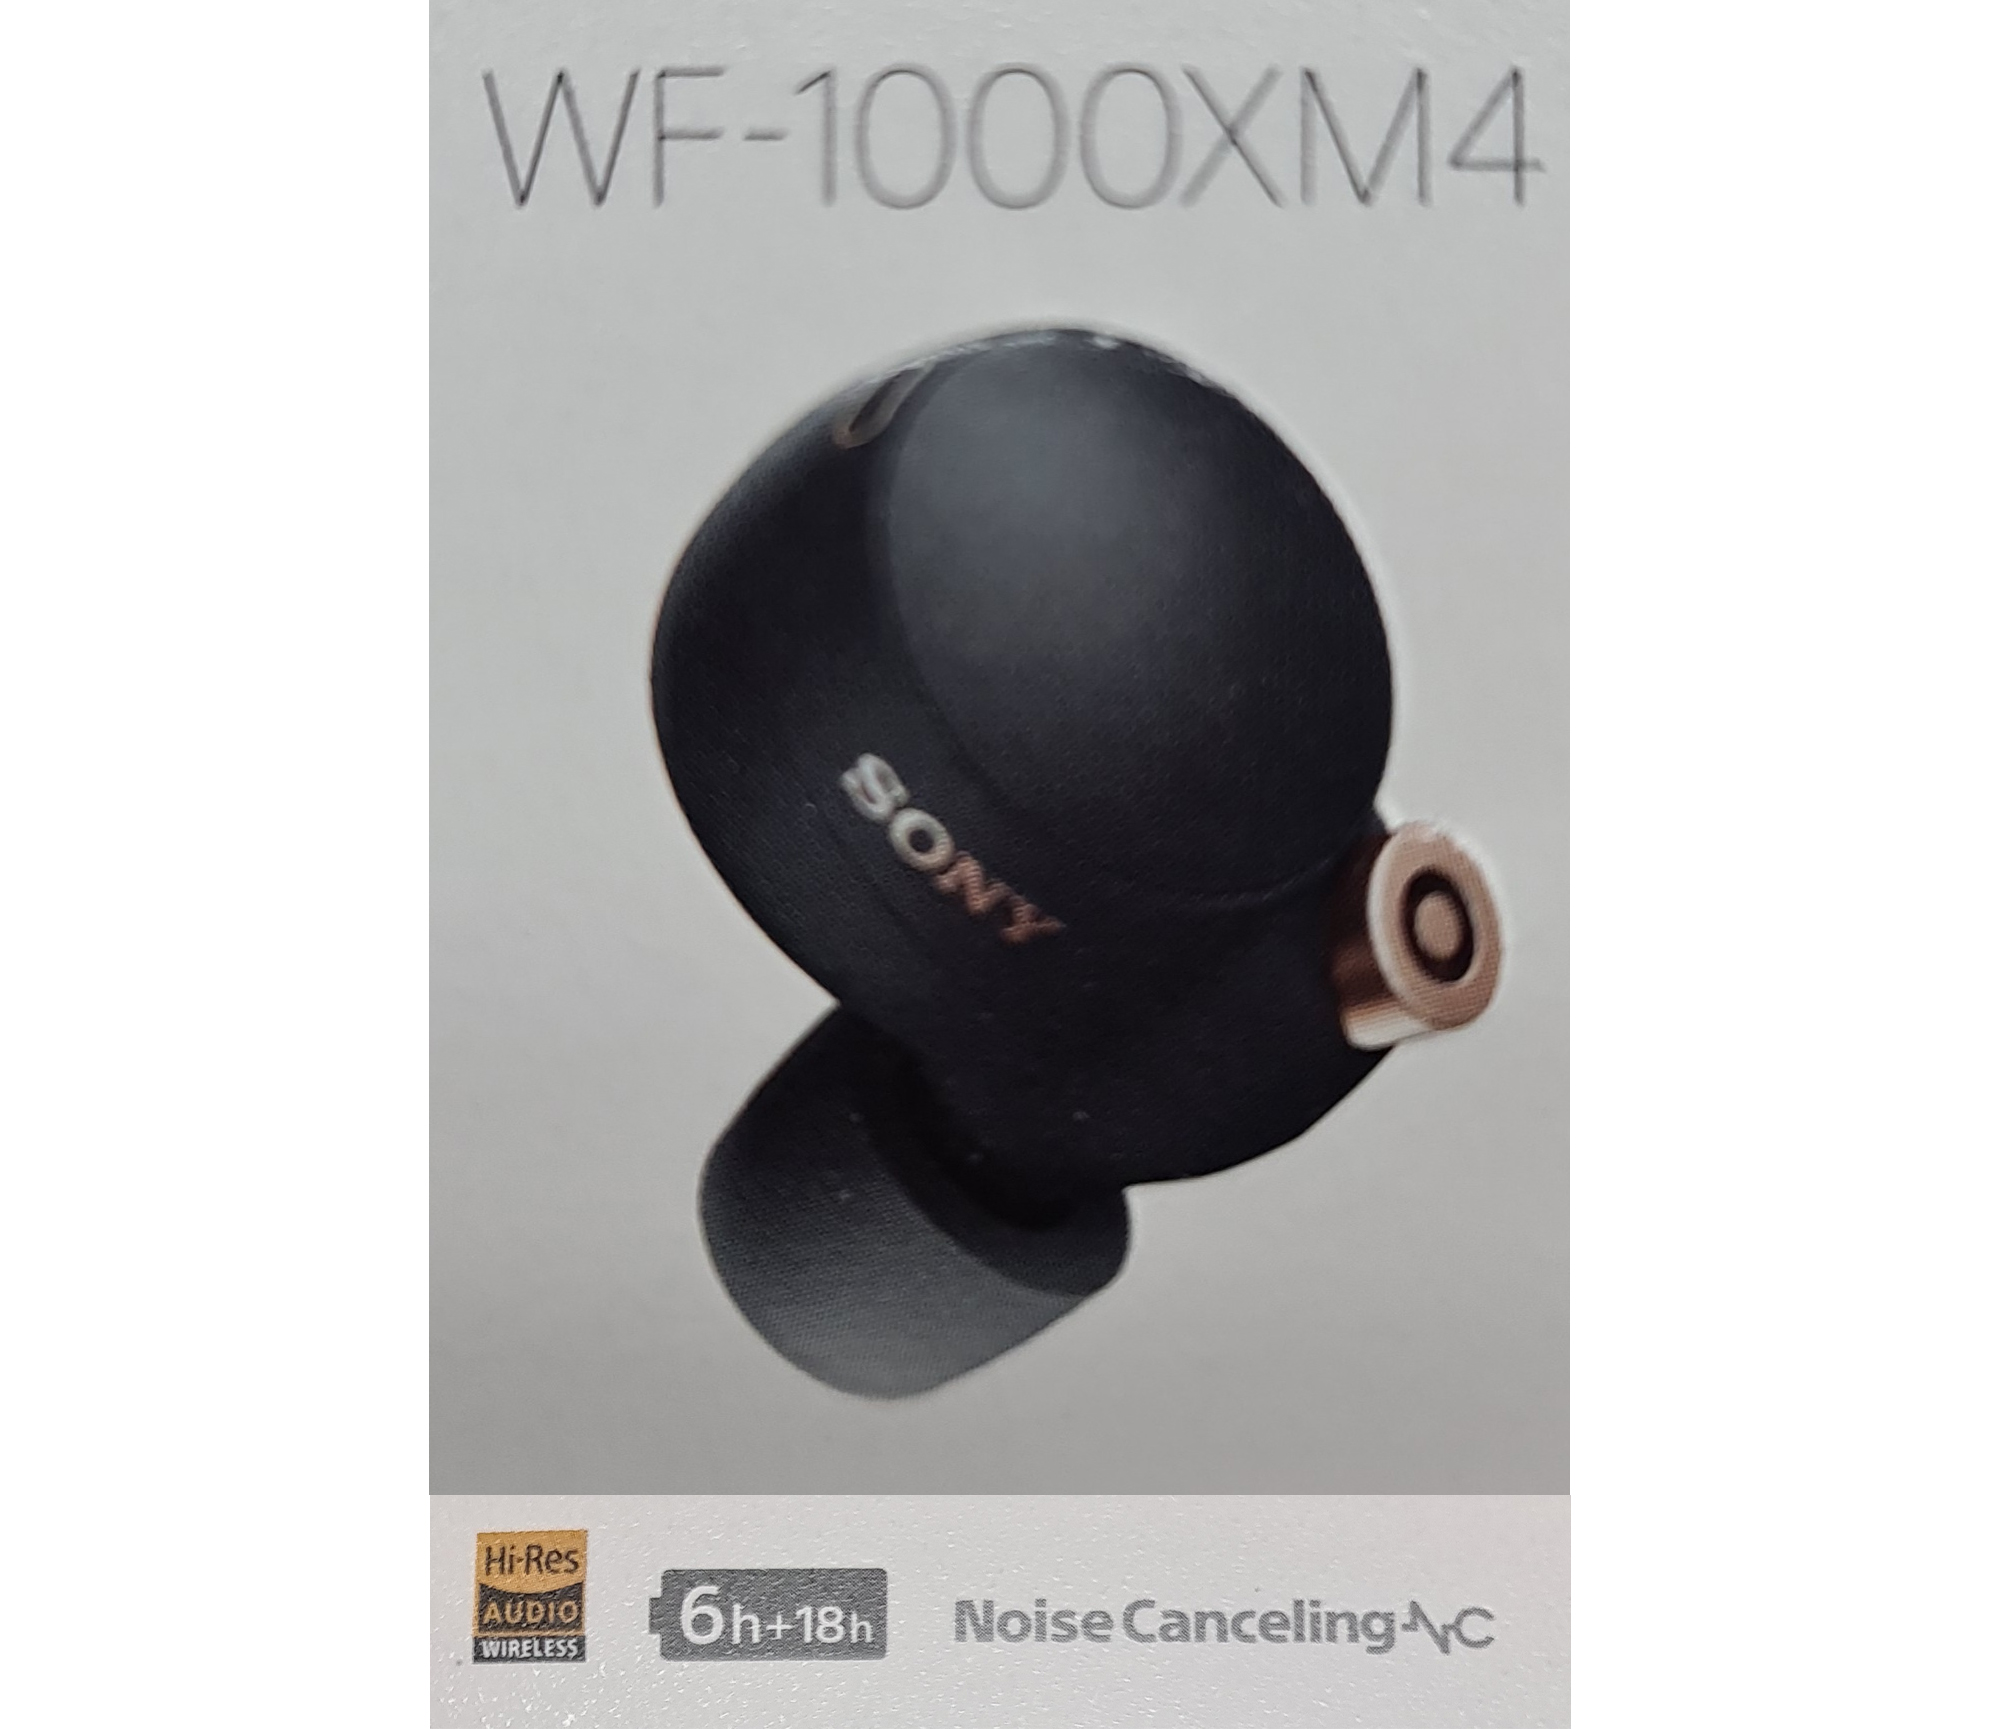 Sony’s WF-1000XM4 earbuds leak, showing a radically new design